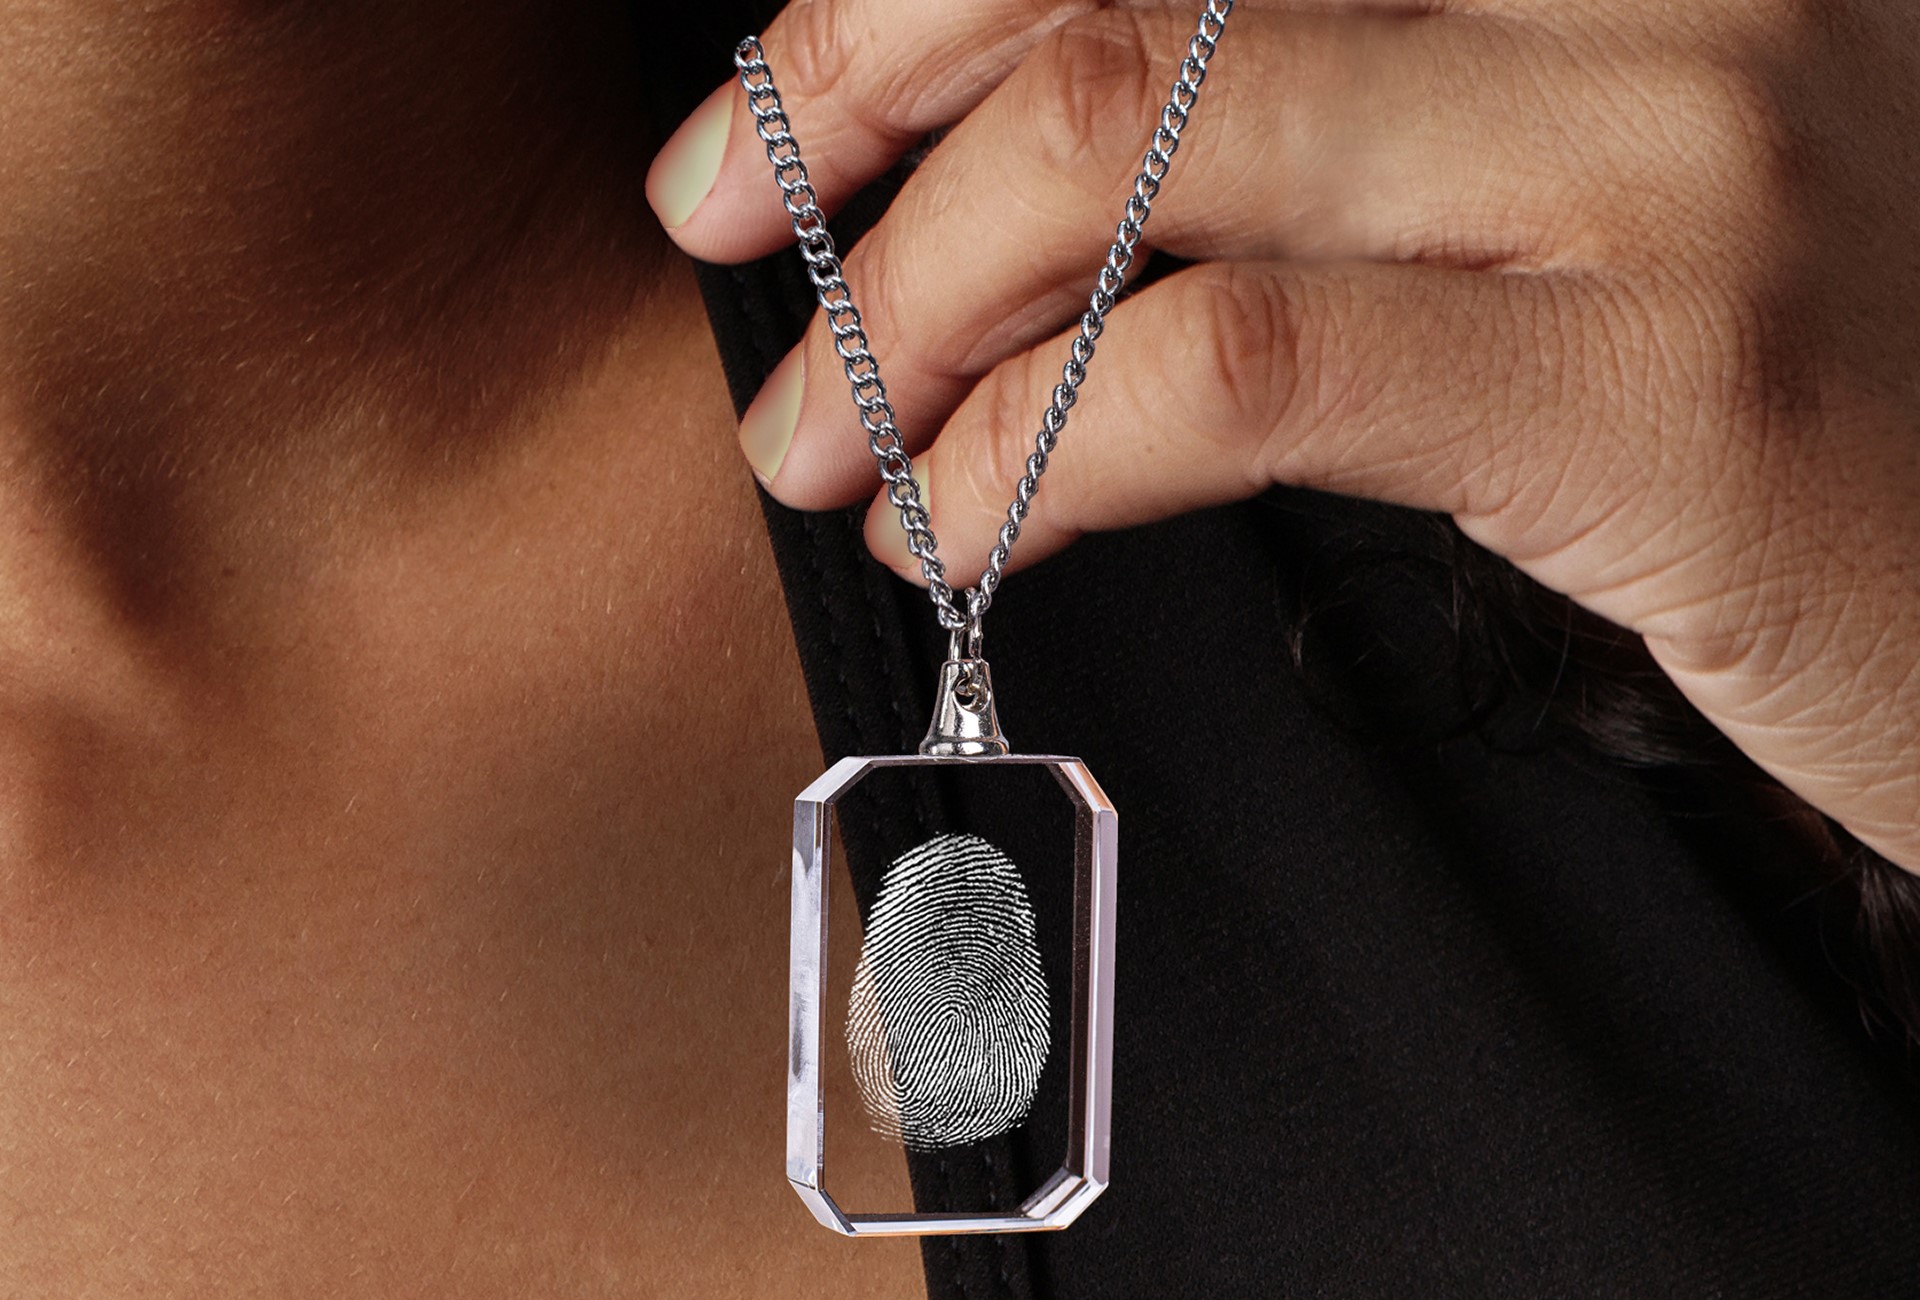 A woman loves the personalized fingerprint necklace she received as a birthday gift.